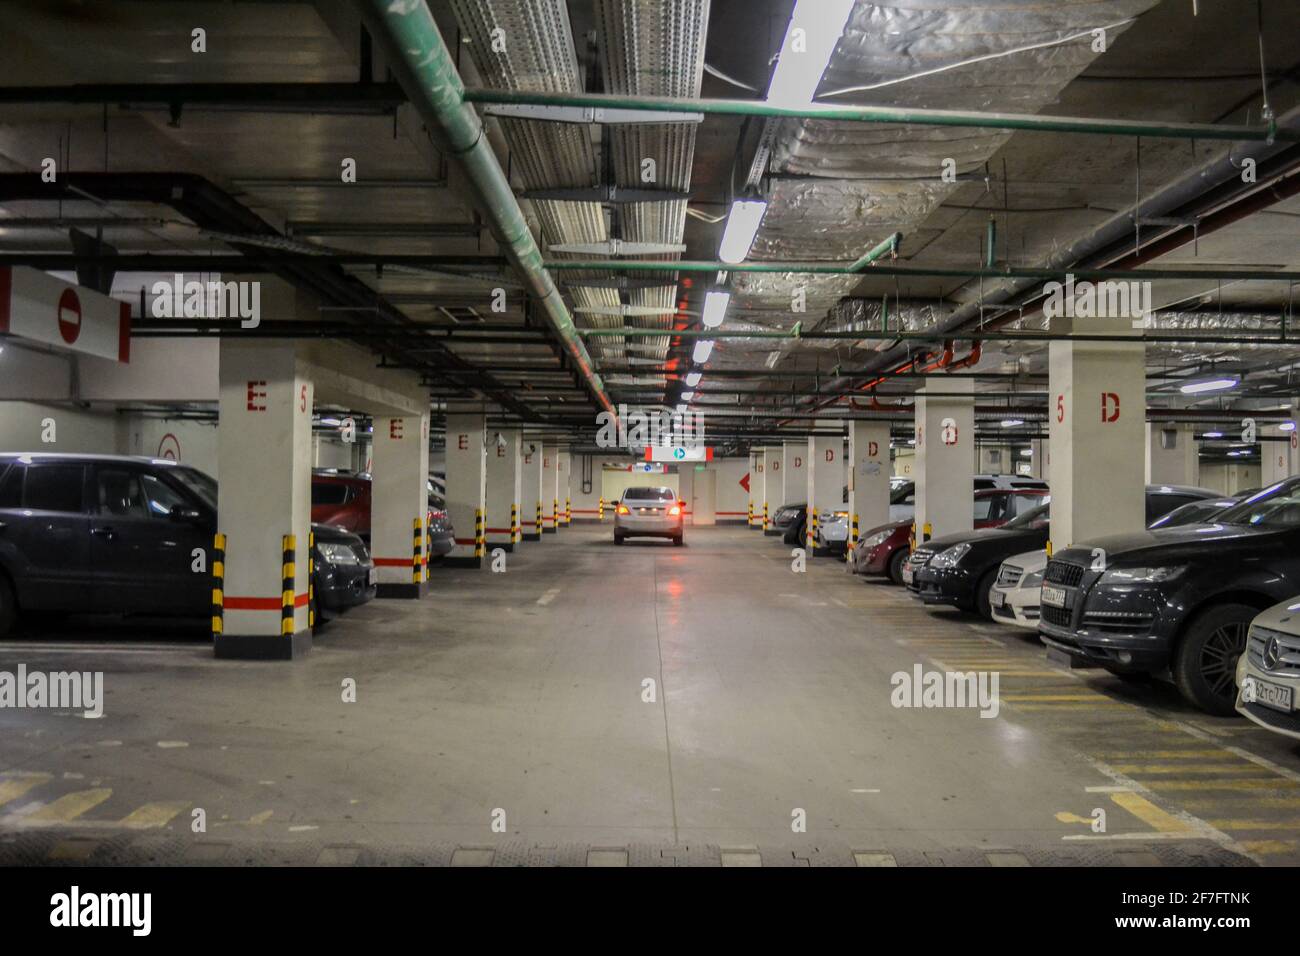 Moscow, Russia, November 2019: Underground car parking on the lower floors of the shopping center. Stock Photo